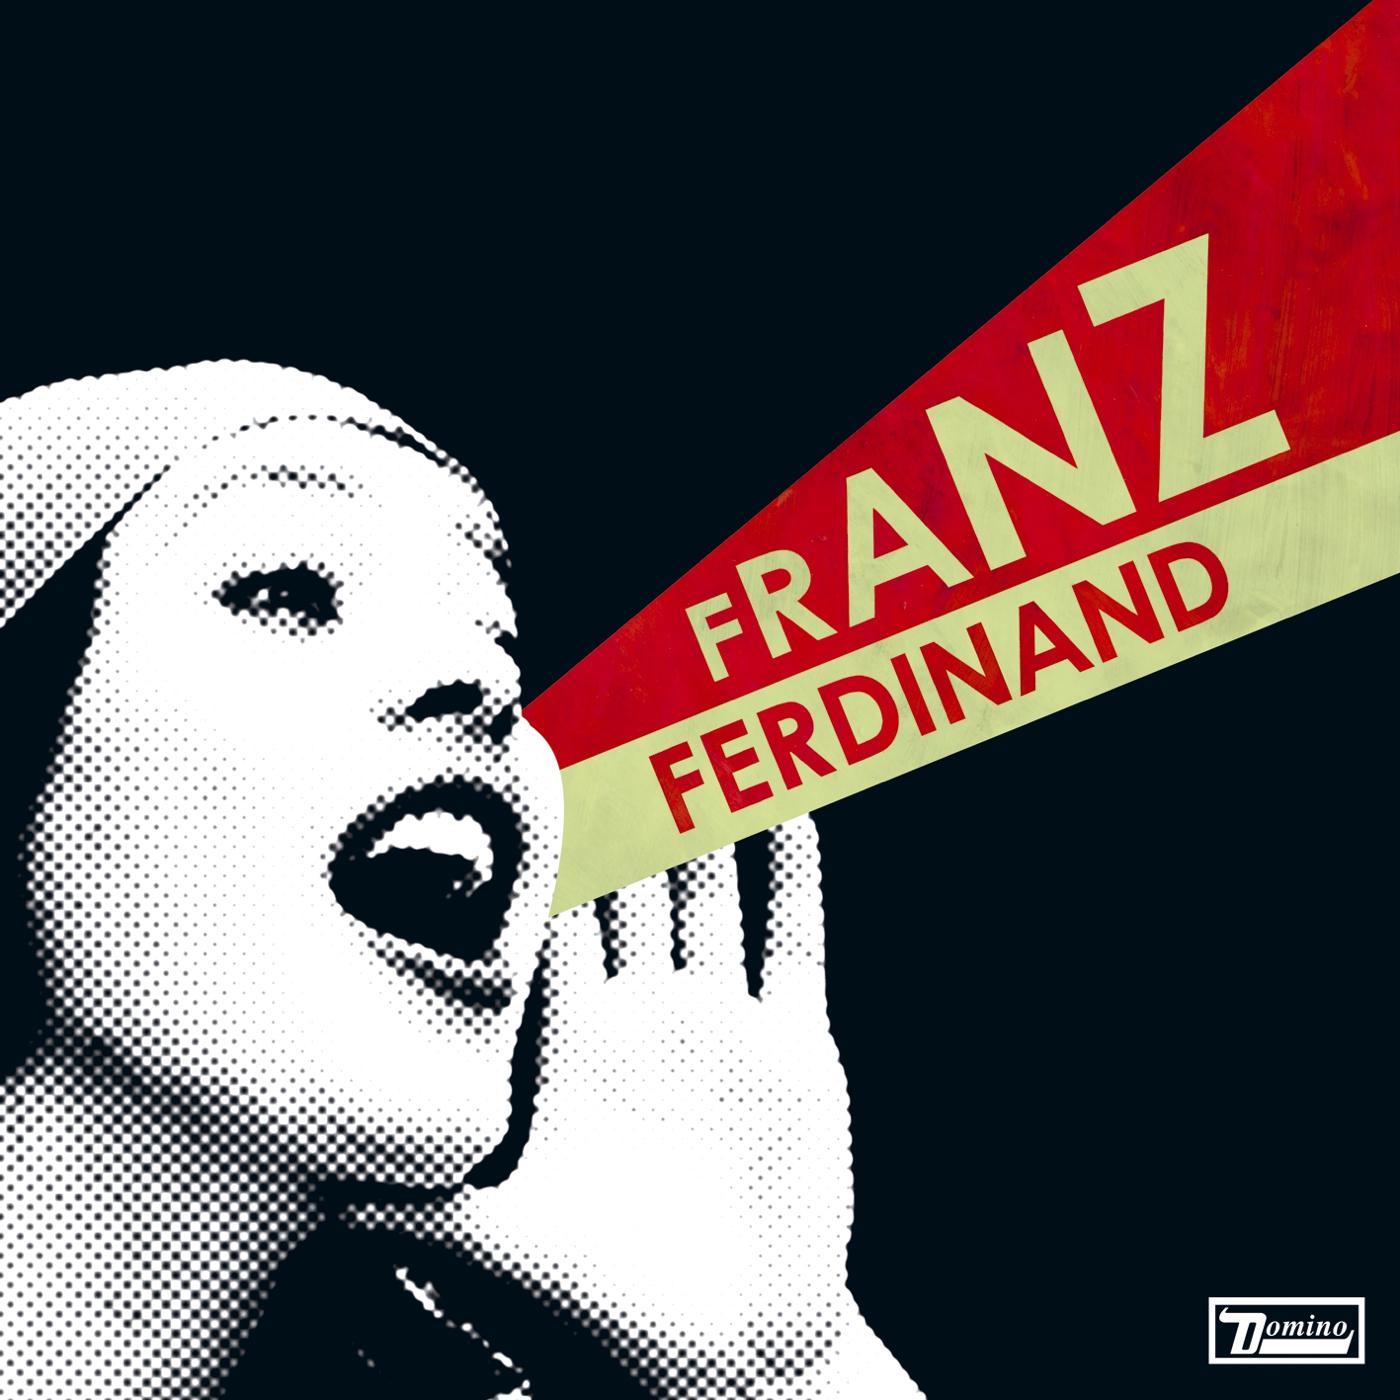 Do You Want To歌词 歌手Franz Ferdinand-专辑You Could Have It So Much Better-单曲《Do You Want To》LRC歌词下载